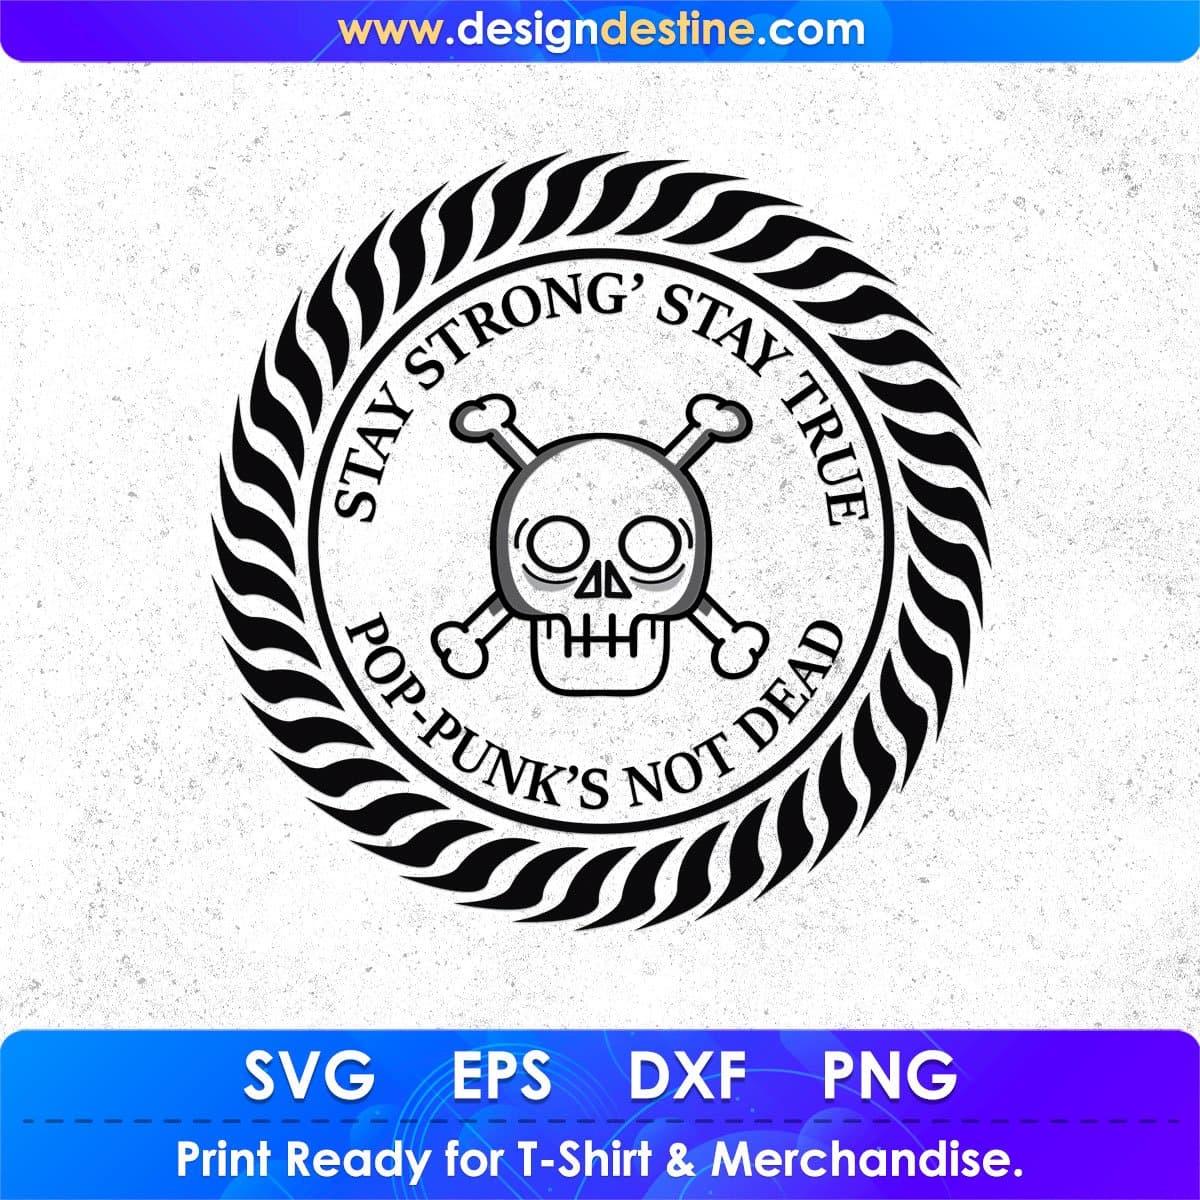 Stay Strong Stay True Pop-Punk's Not Dead T shirt Design In Svg Png Cutting Printable Files